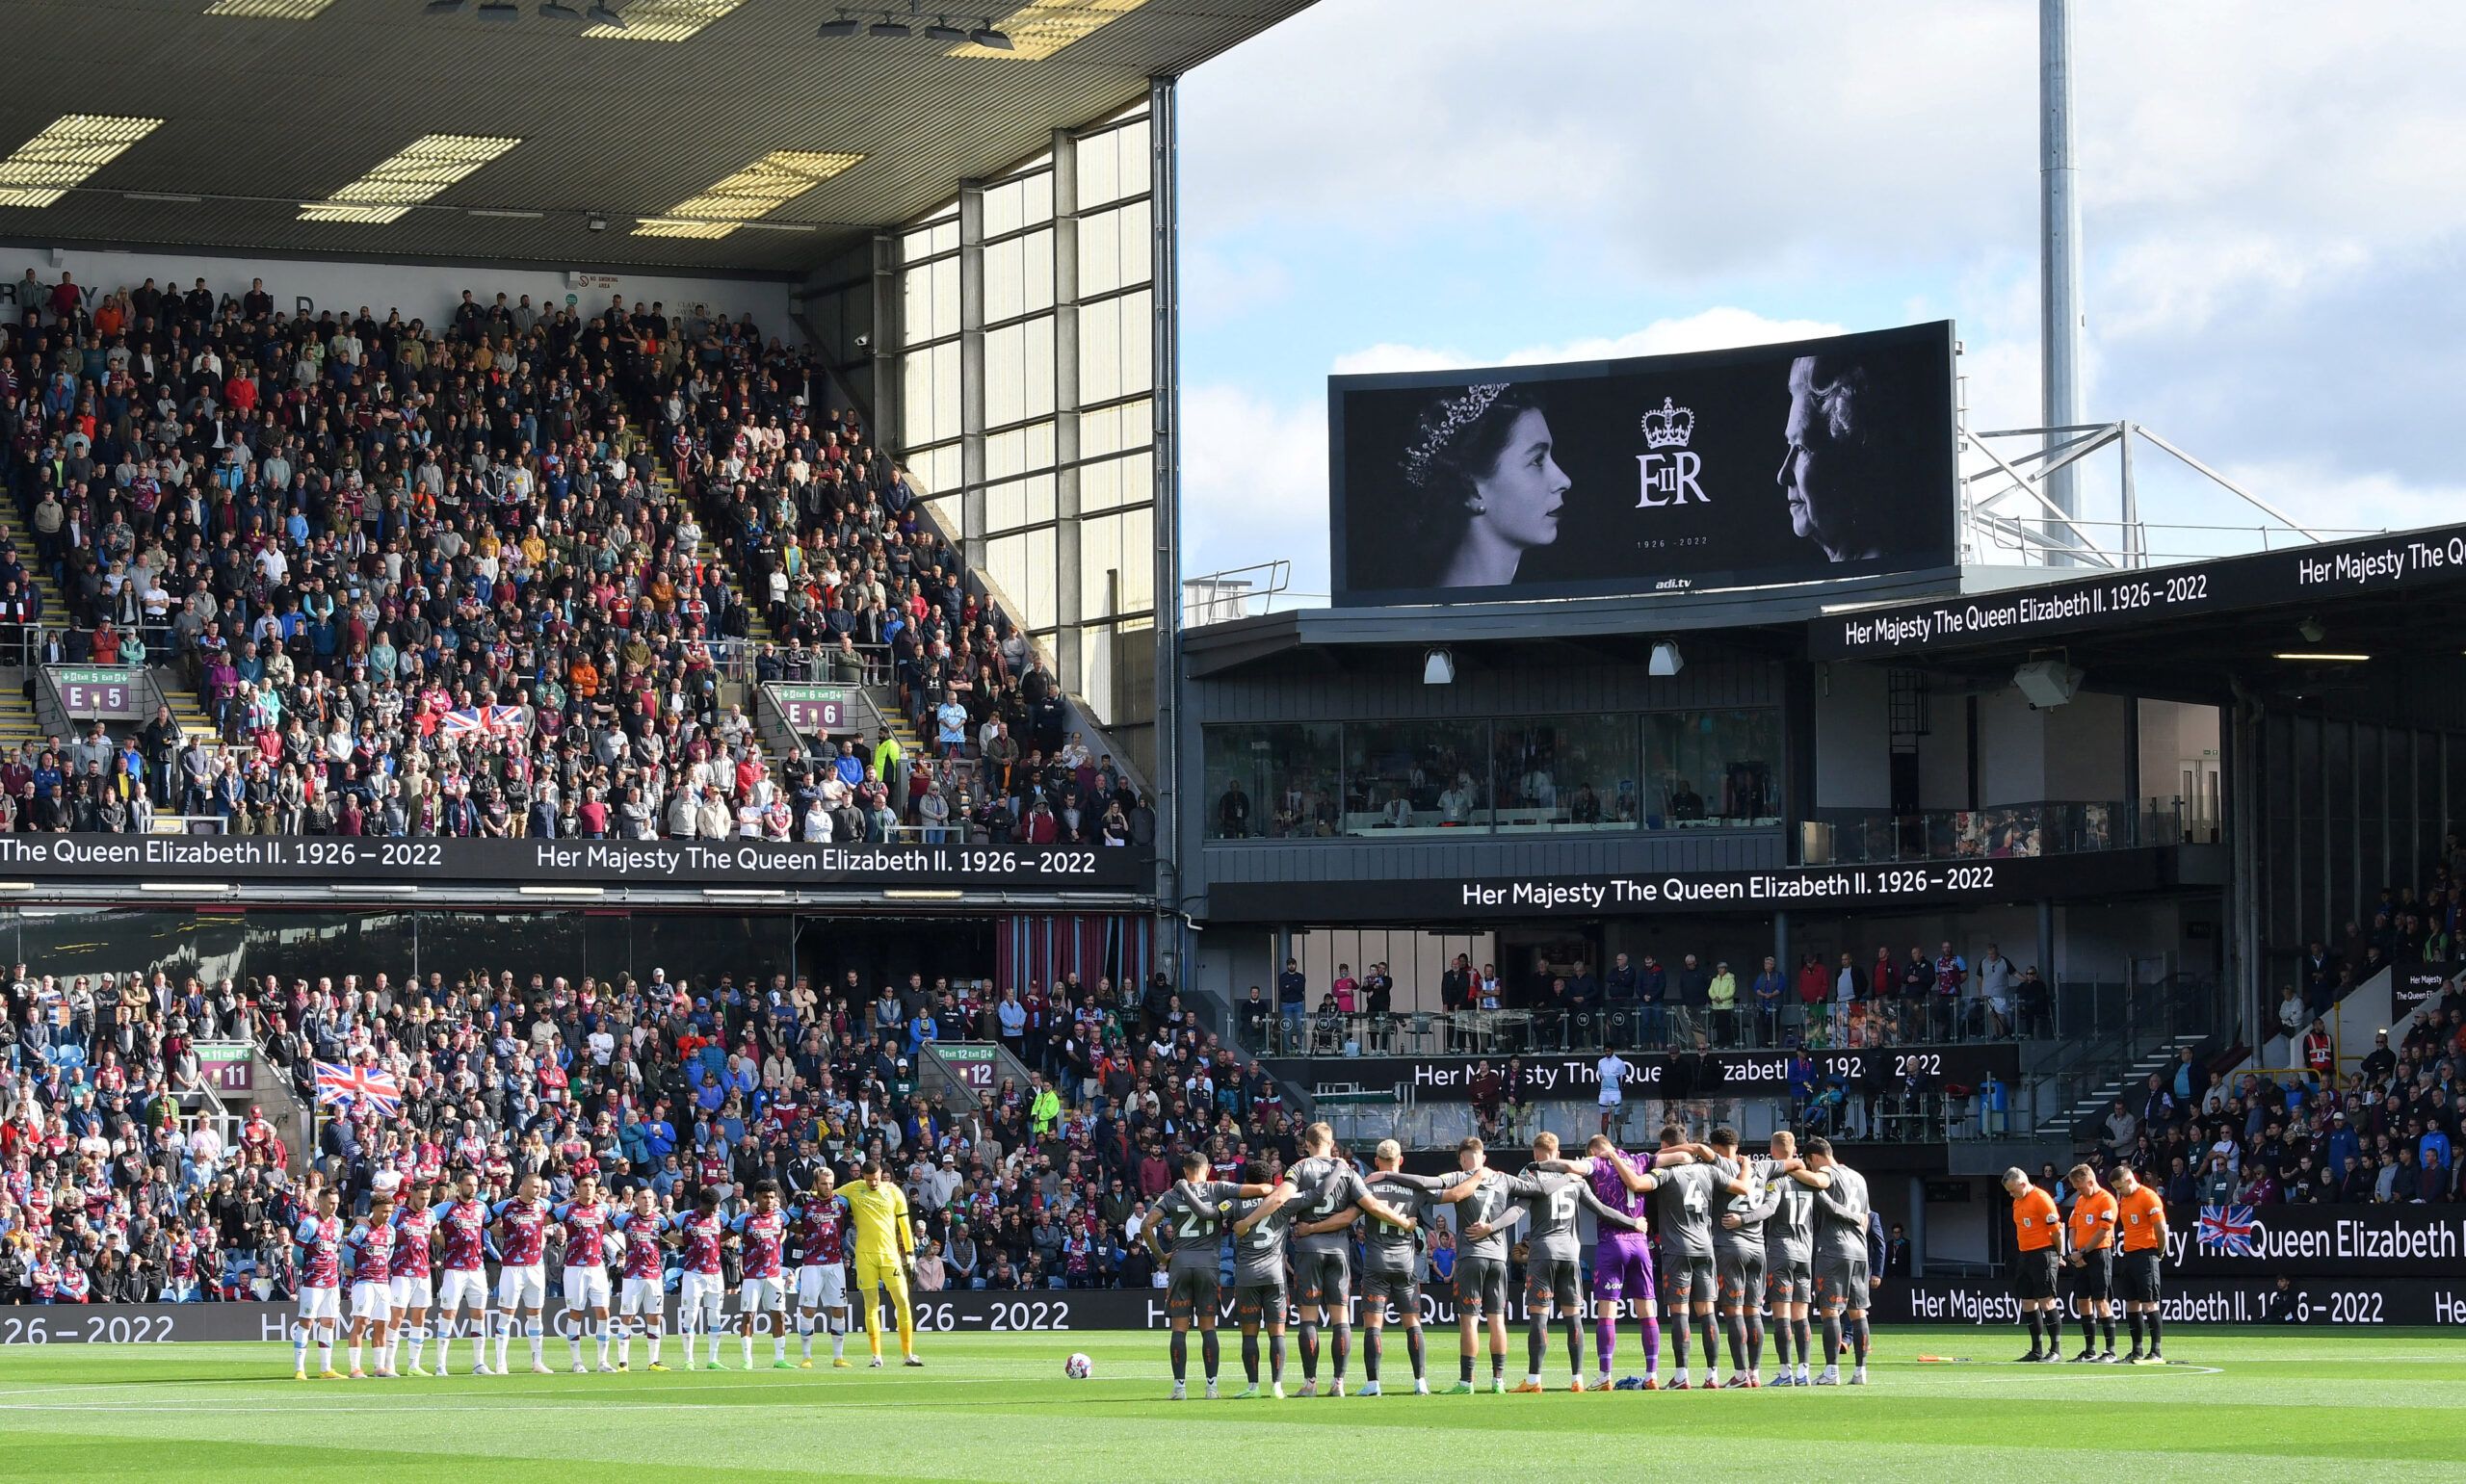 Soccer Football - Championship - Burnley v Bristol City - Turf Moor, Burnley, Britain - September 17, 2022  General view during a minutes silence before the match following the death of Britain's Queen Elizabeth  Action Images via Reuters/Paul Burrows  EDITORIAL USE ONLY. No use with unauthorized audio, video, data, fixture lists, club/league logos or 